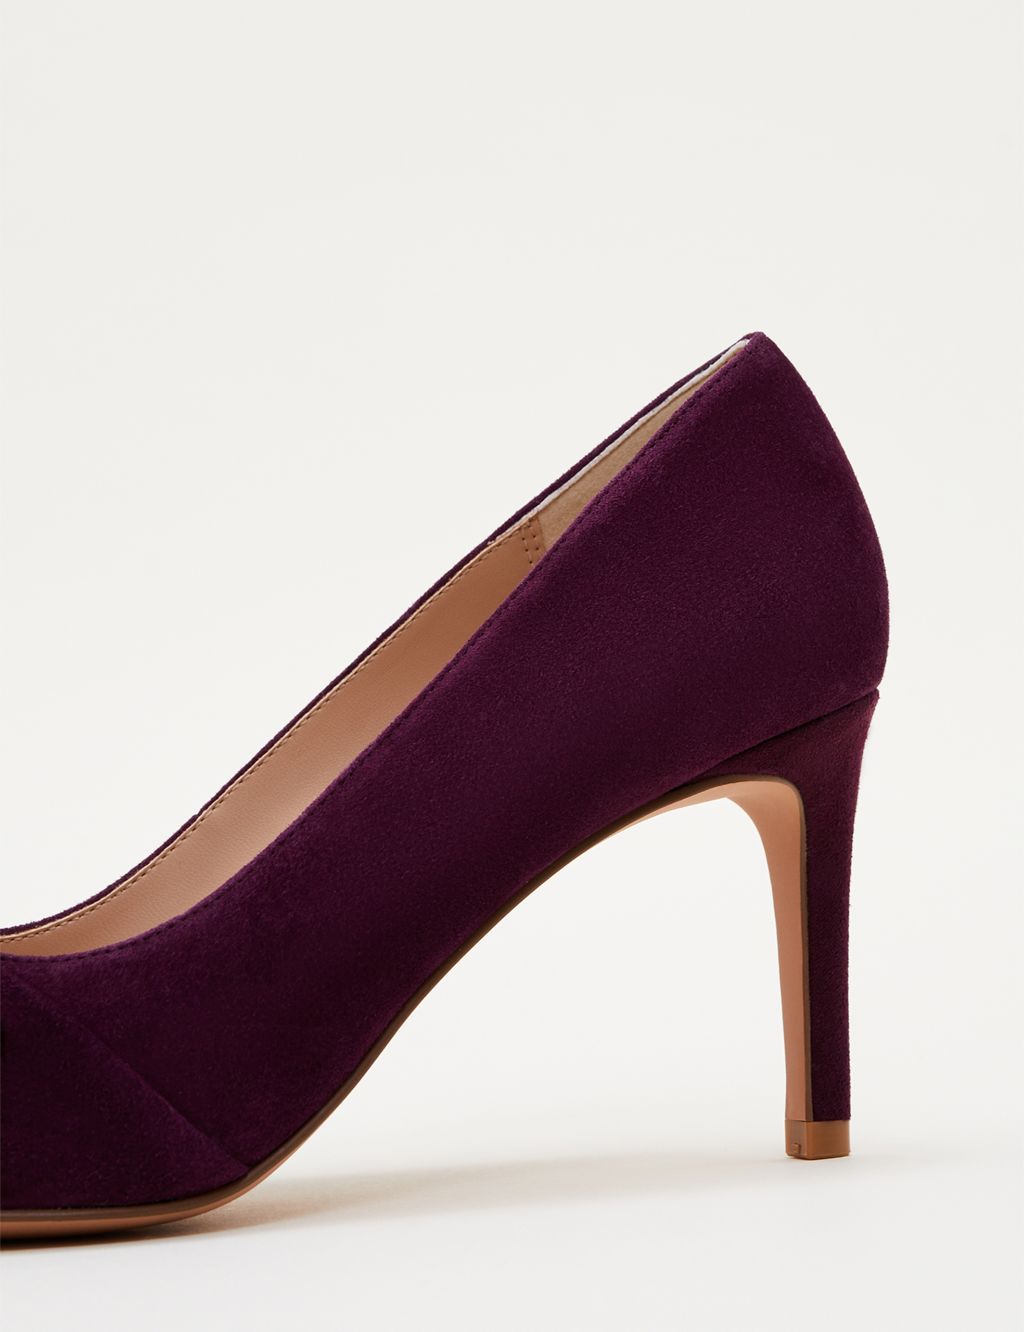 Suede Stiletto Heel Pointed Court Shoes image 4